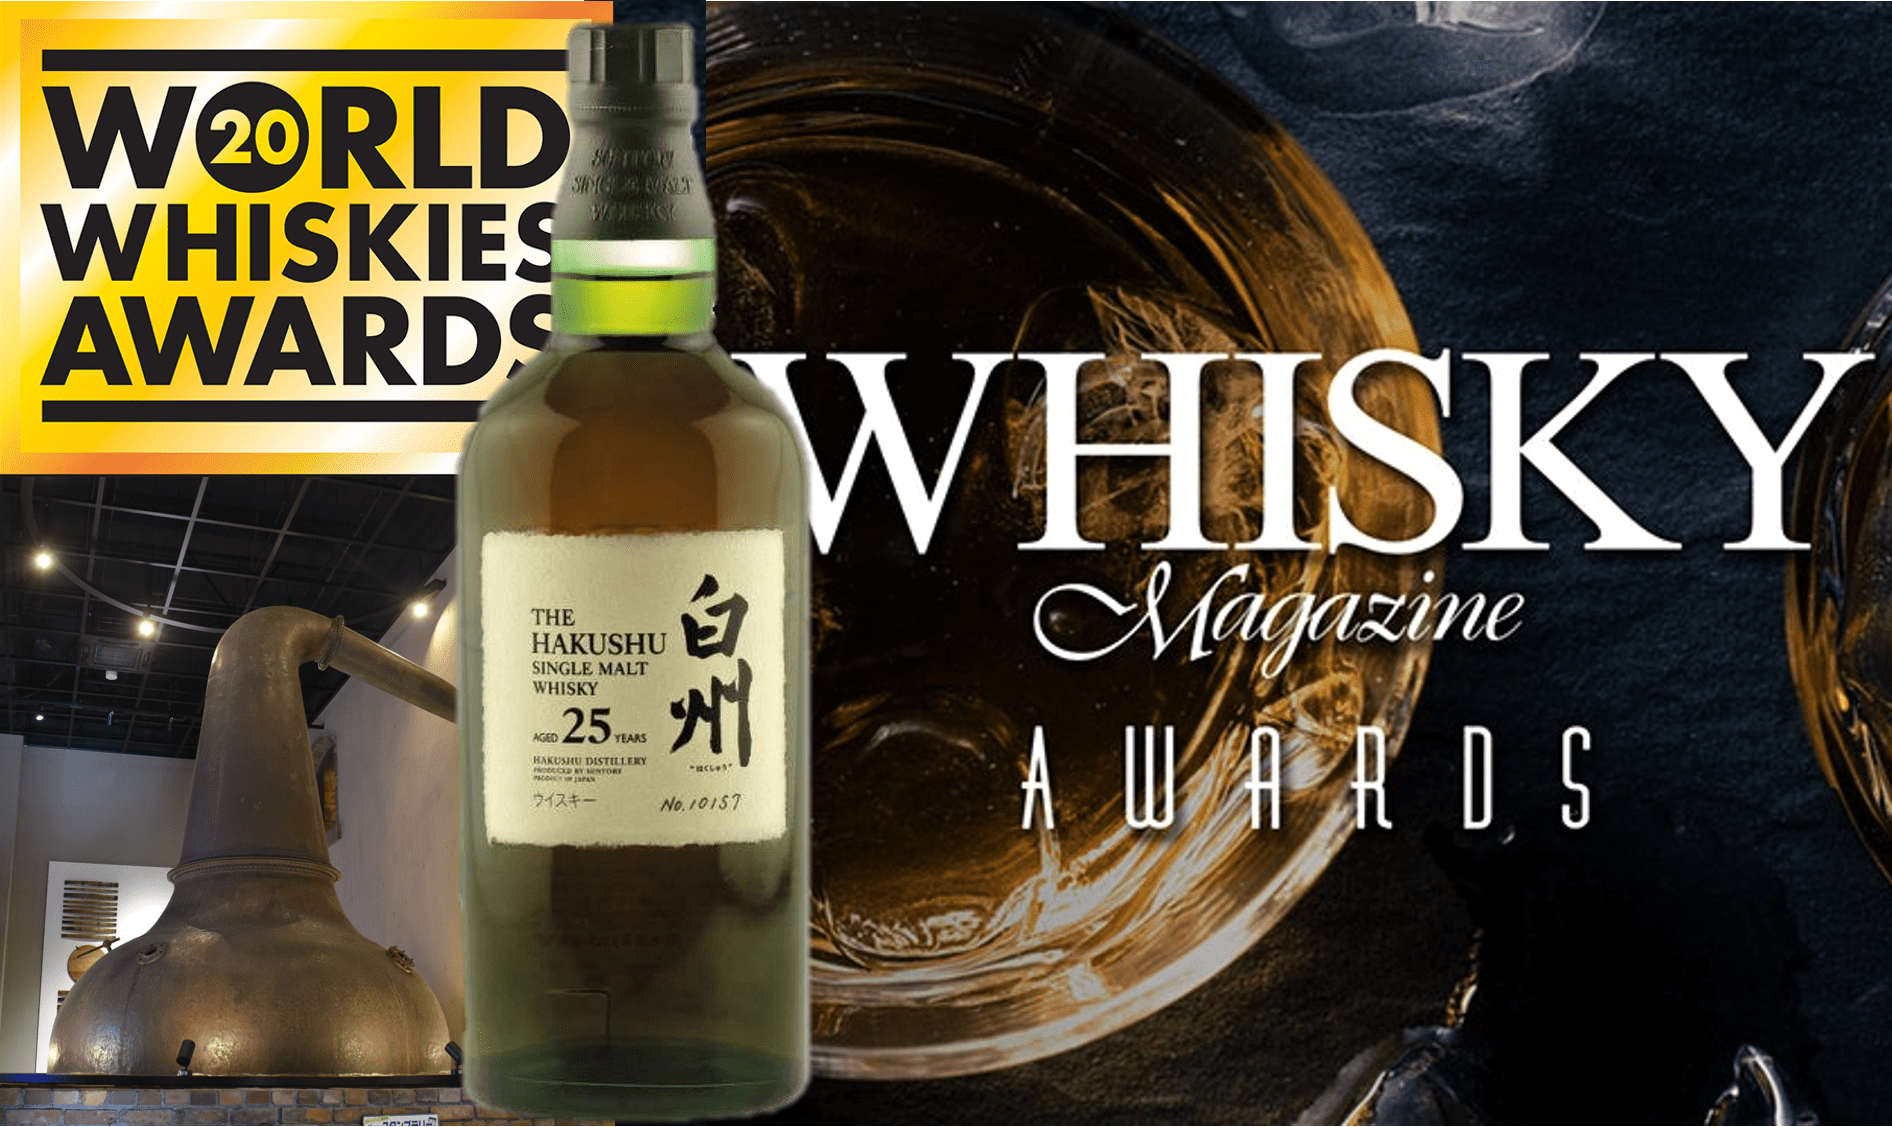 The 2020 World Whisky Award ceremony just in London